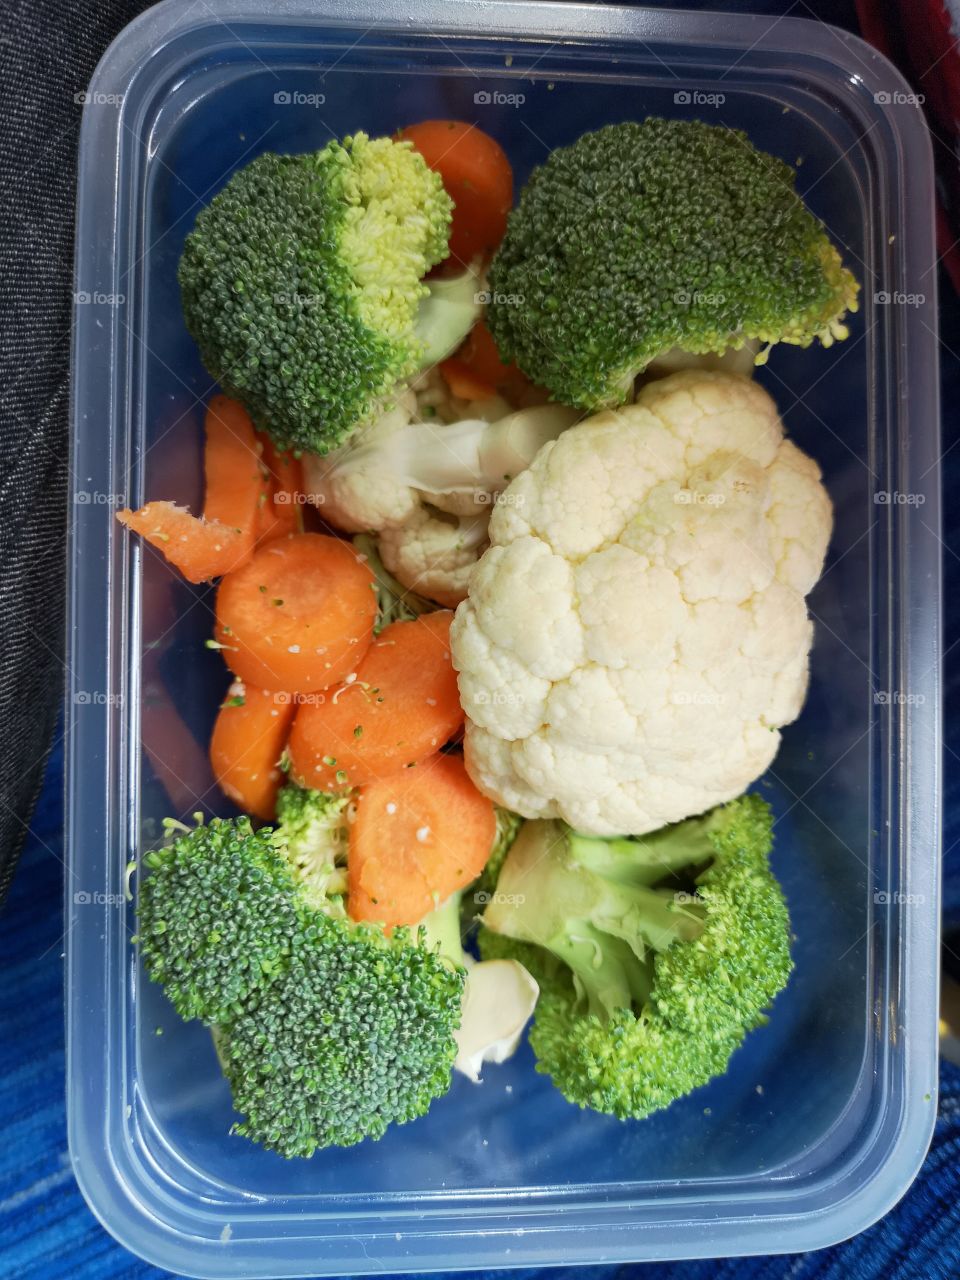 Vegetables in a tub.